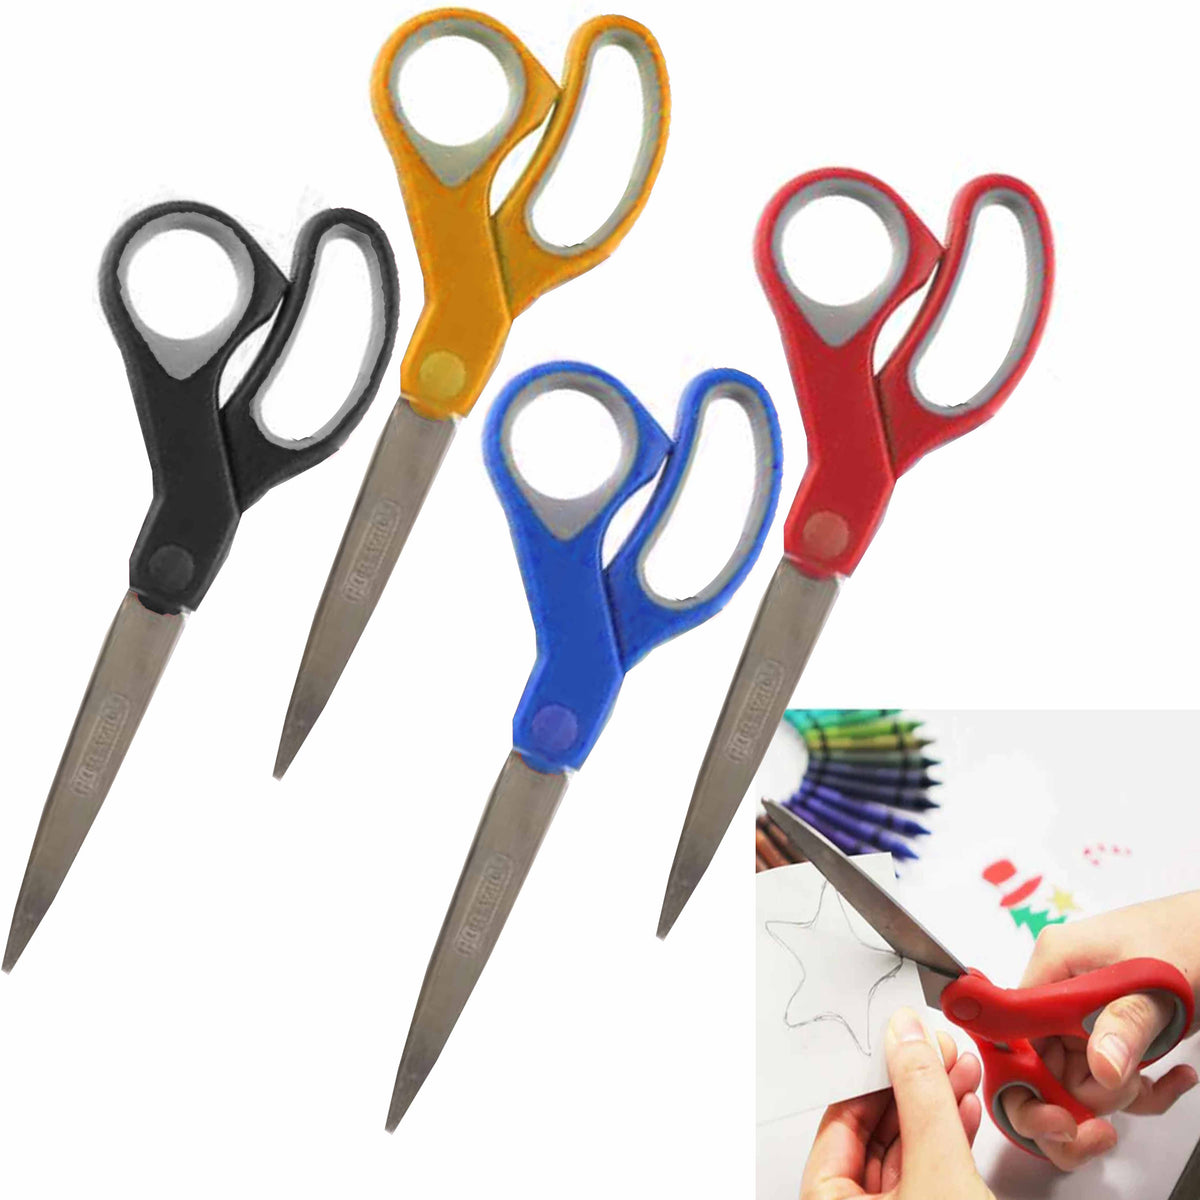 Singer 00450 8-Inch All Purpose Scissor With Comfort Grip - Imported  Products from USA - iBhejo